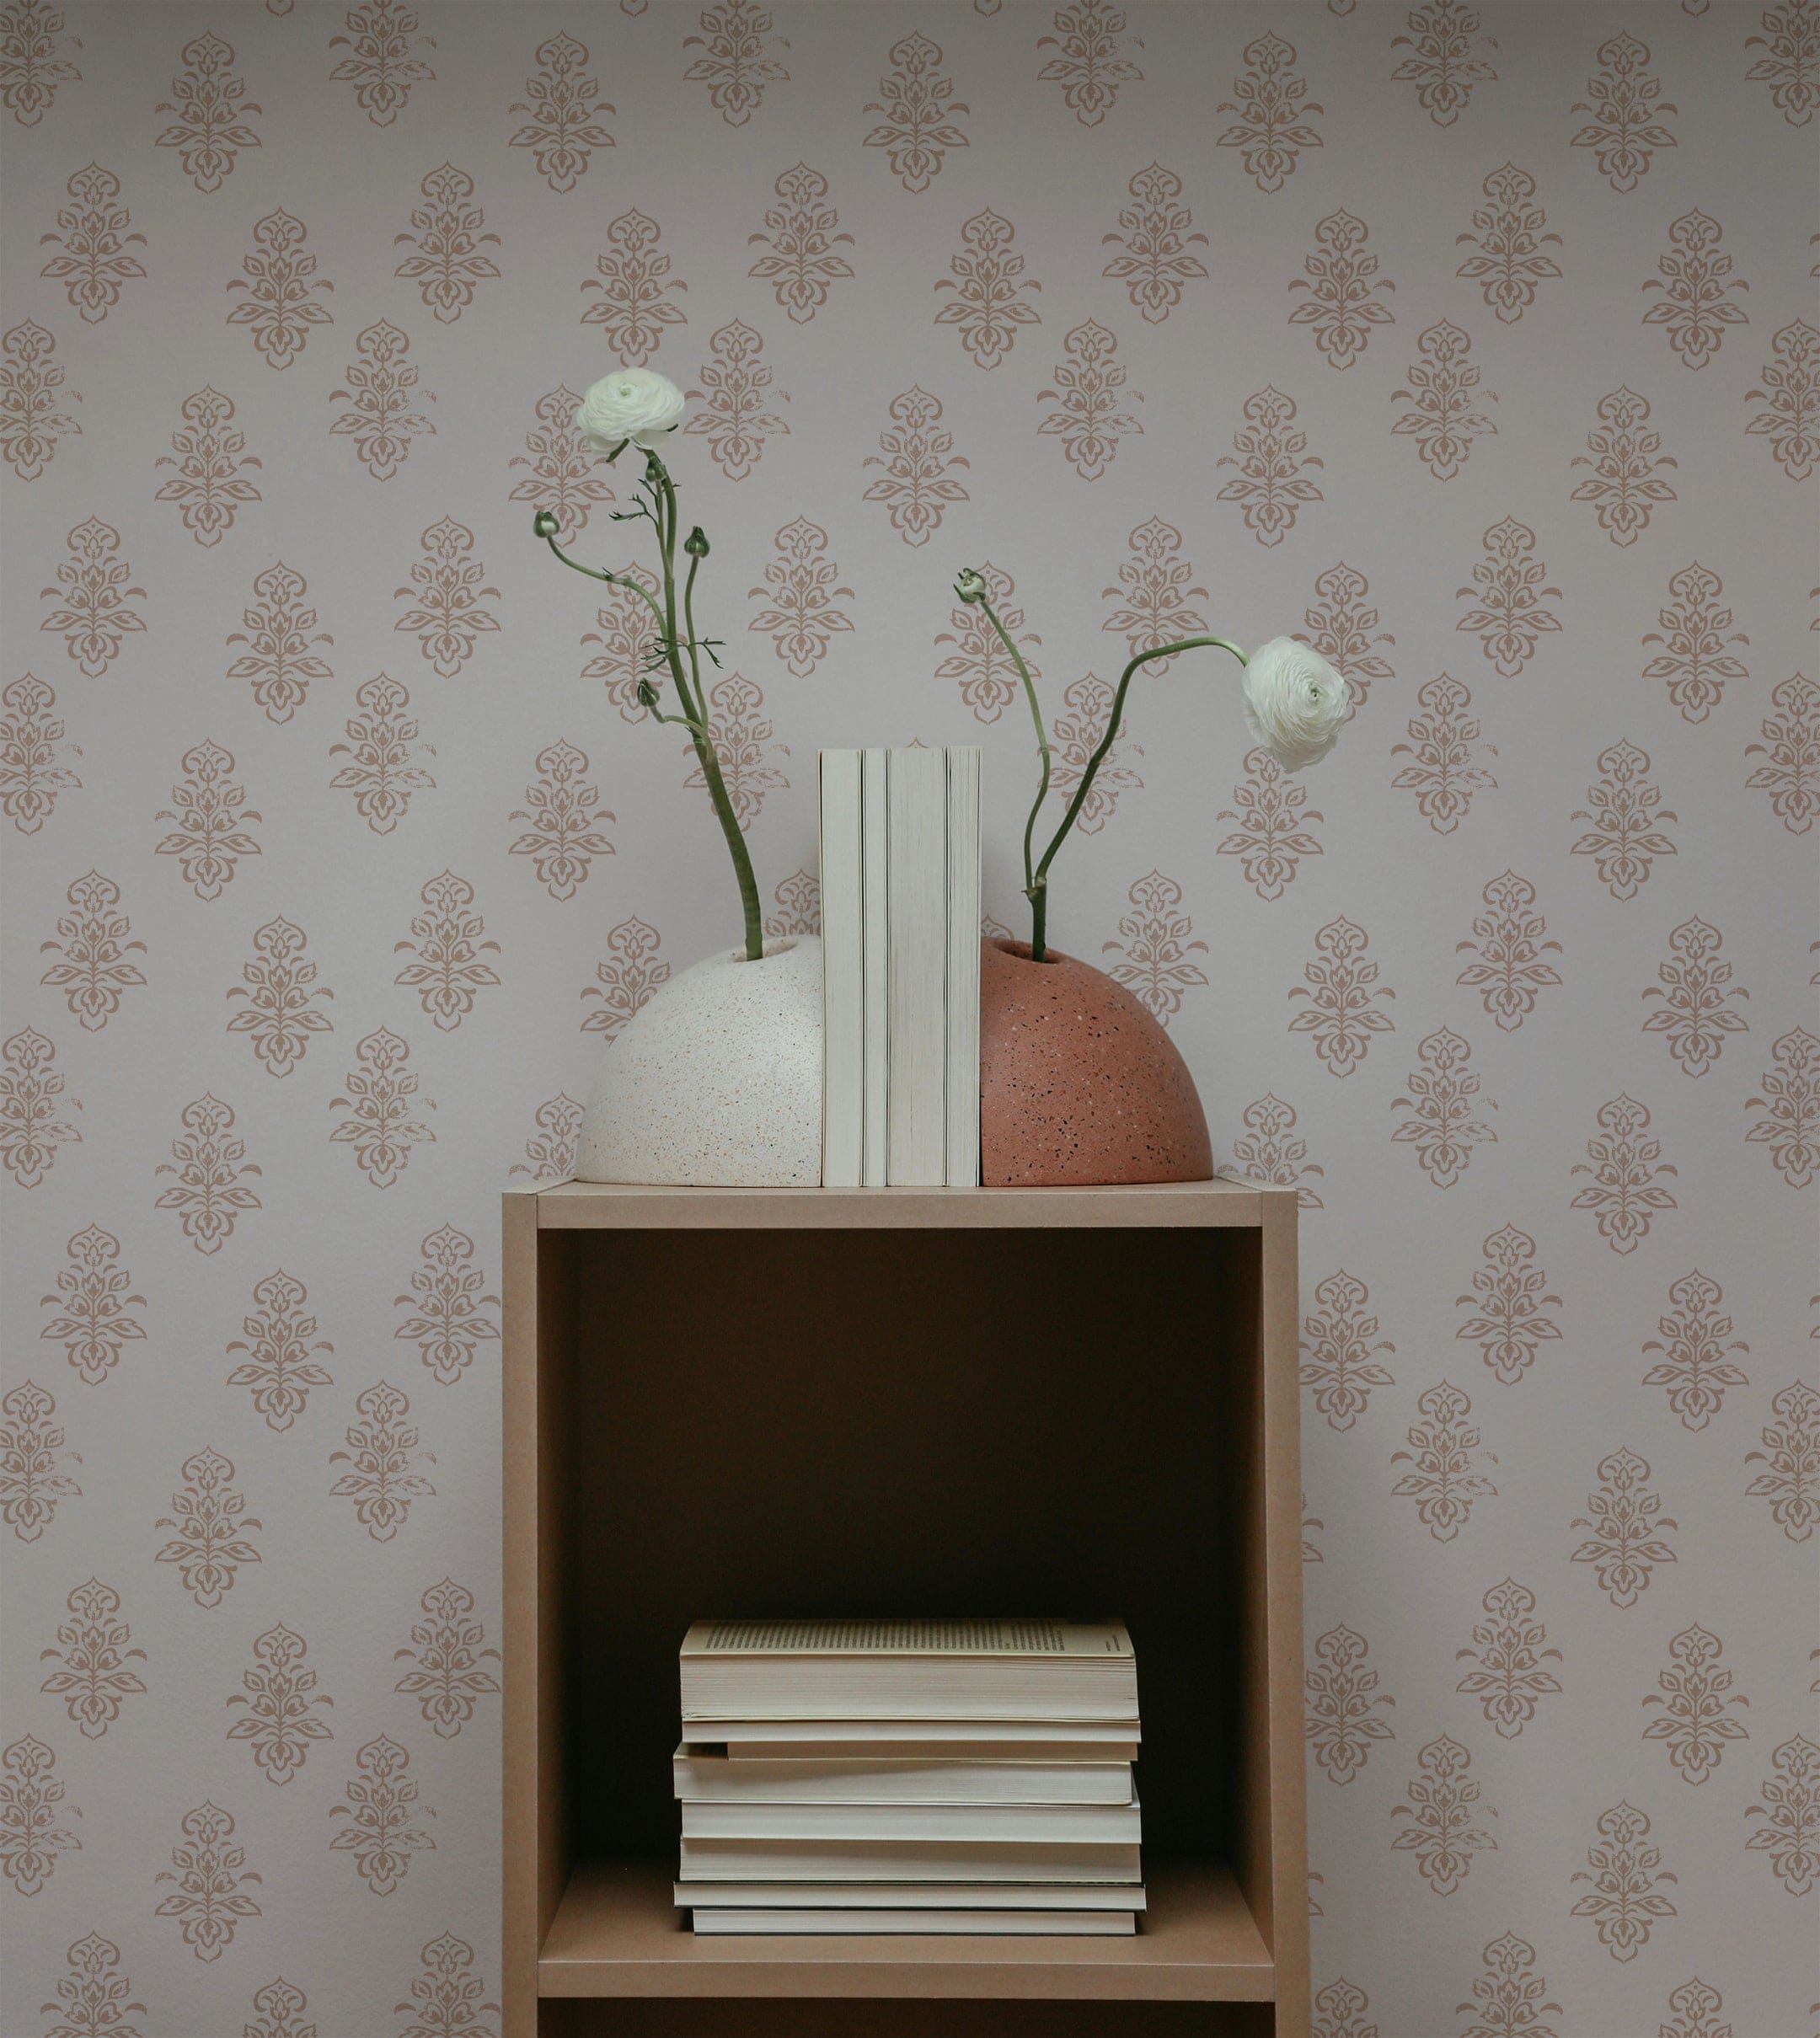 An interior scene featuring the Antique Chic Wallpaper. The wallpaper's pattern of terracotta motifs on a light beige background provides a stylish backdrop. A small wooden shelf holds decor items, including two vases with long-stemmed flowers and a stack of books, creating a sophisticated and serene setting.